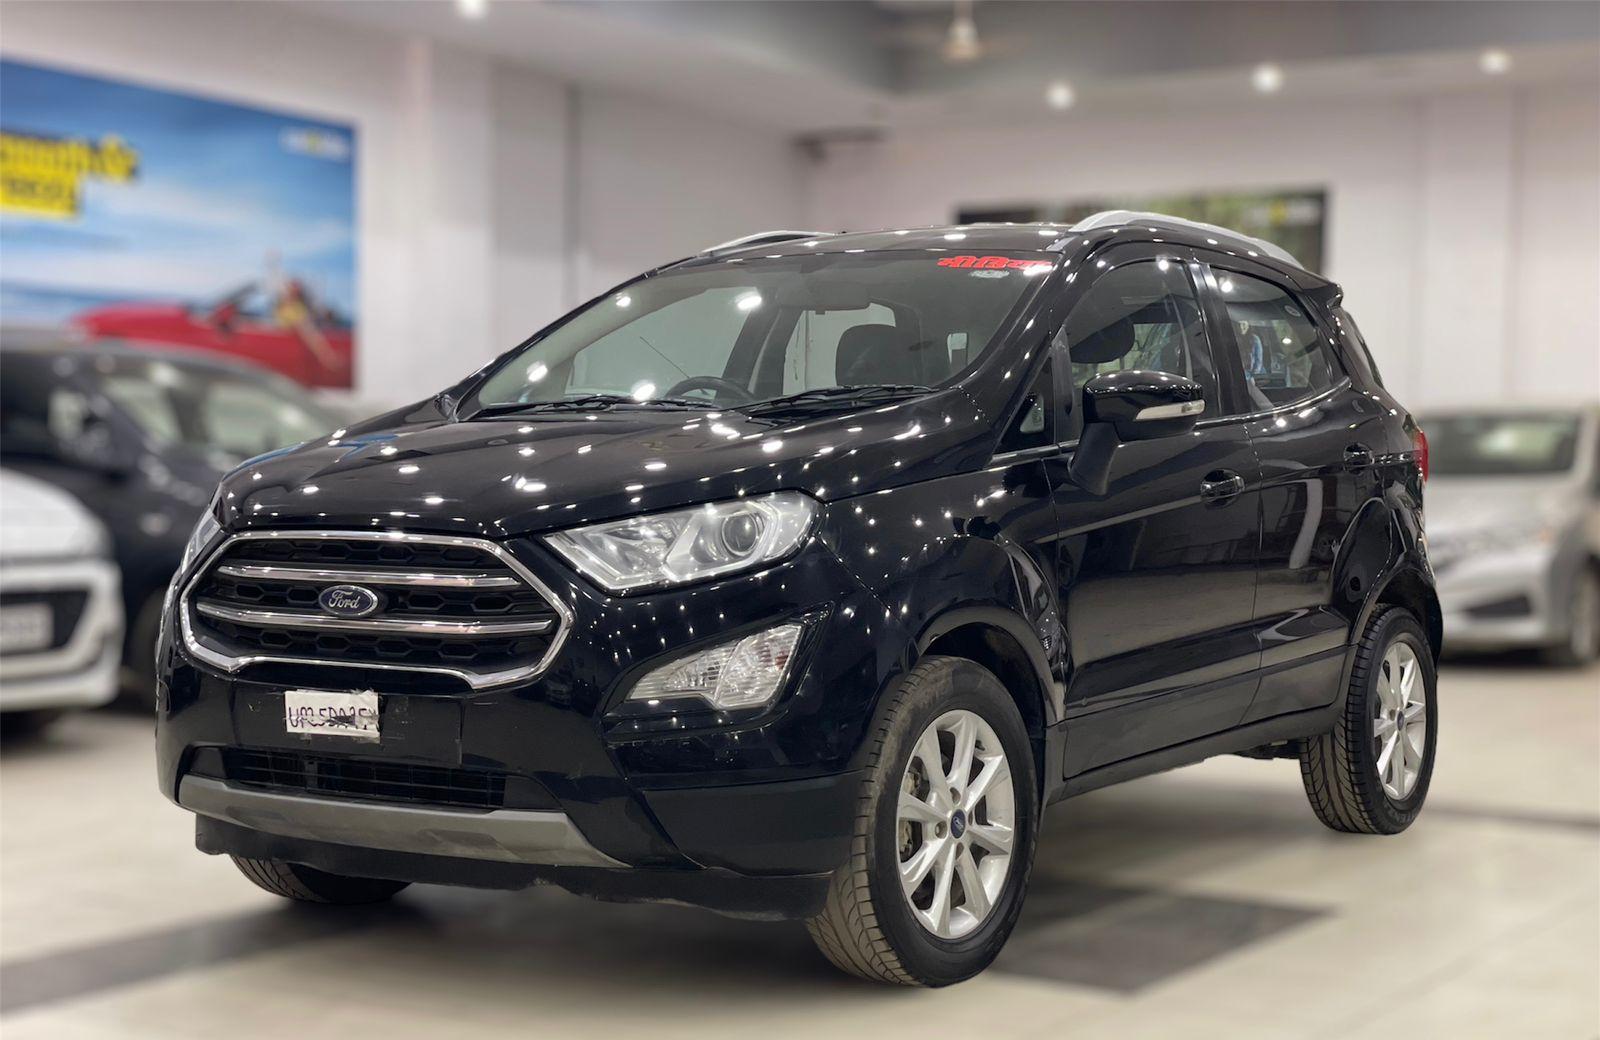 Used 2020 Ford EcoSport